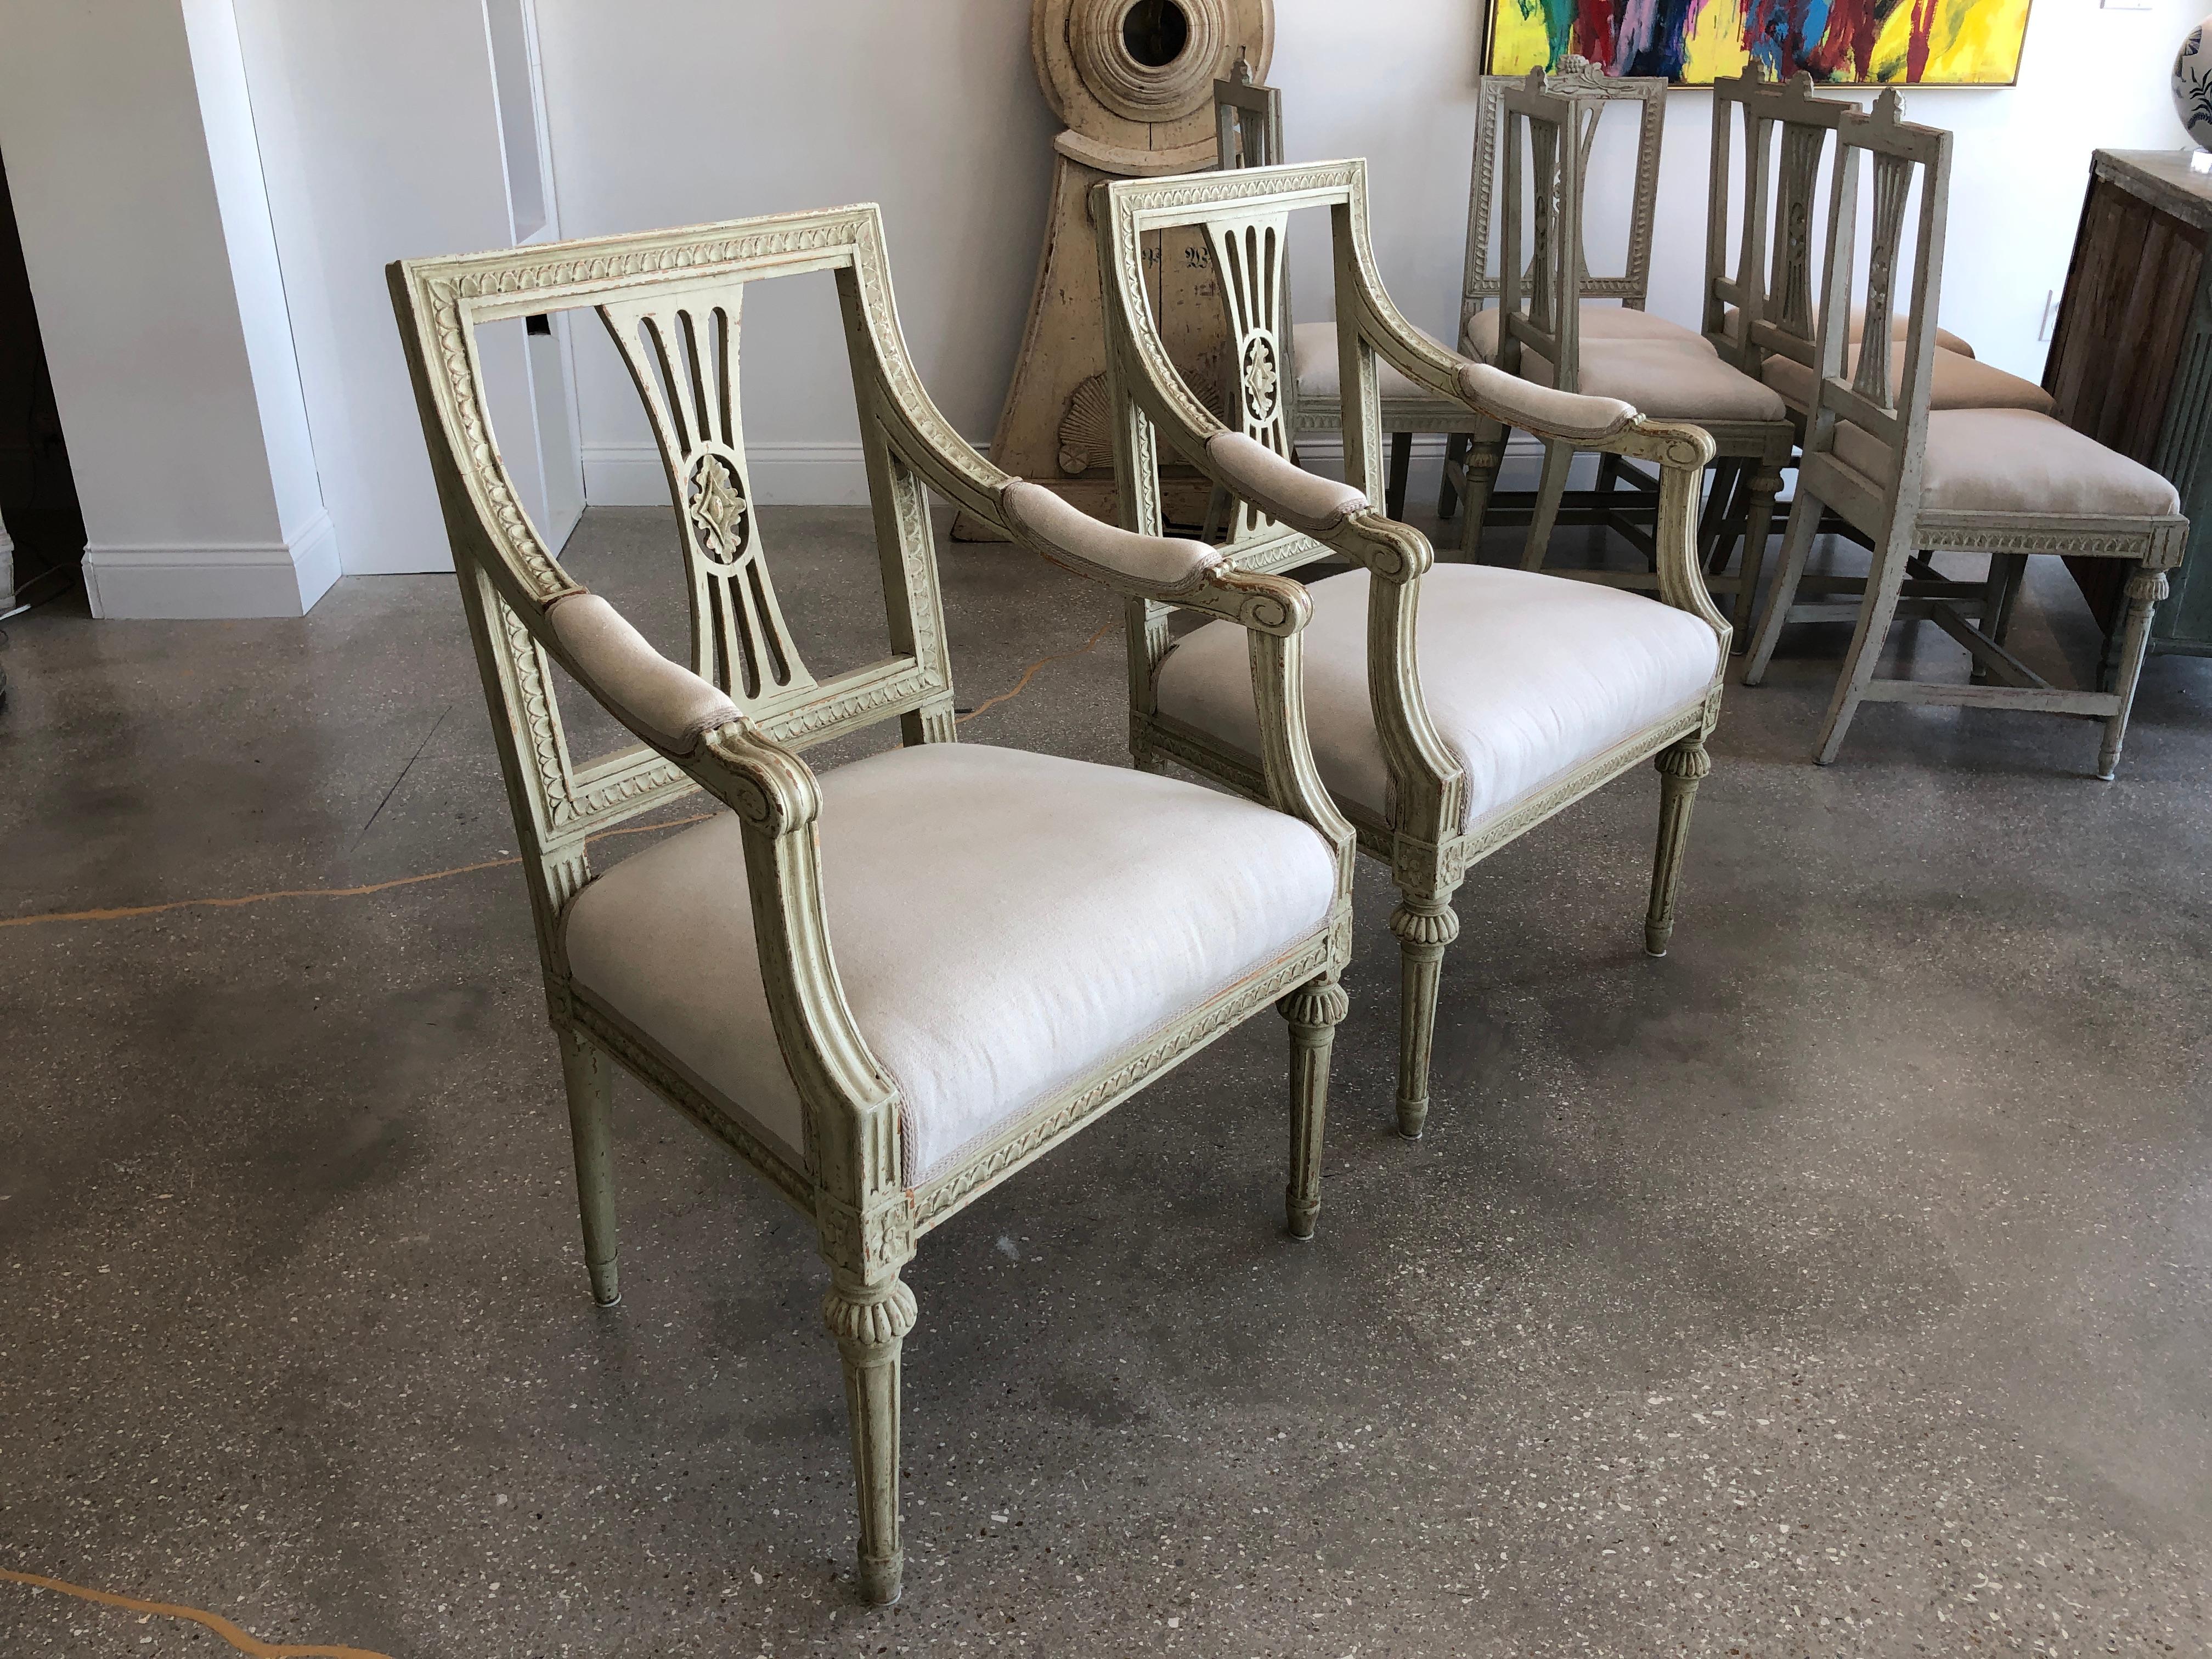 Pair of Antique Swedish Painted Gustavian Armchairs, circa 1810-1820 In Good Condition For Sale In West Palm Beach, FL